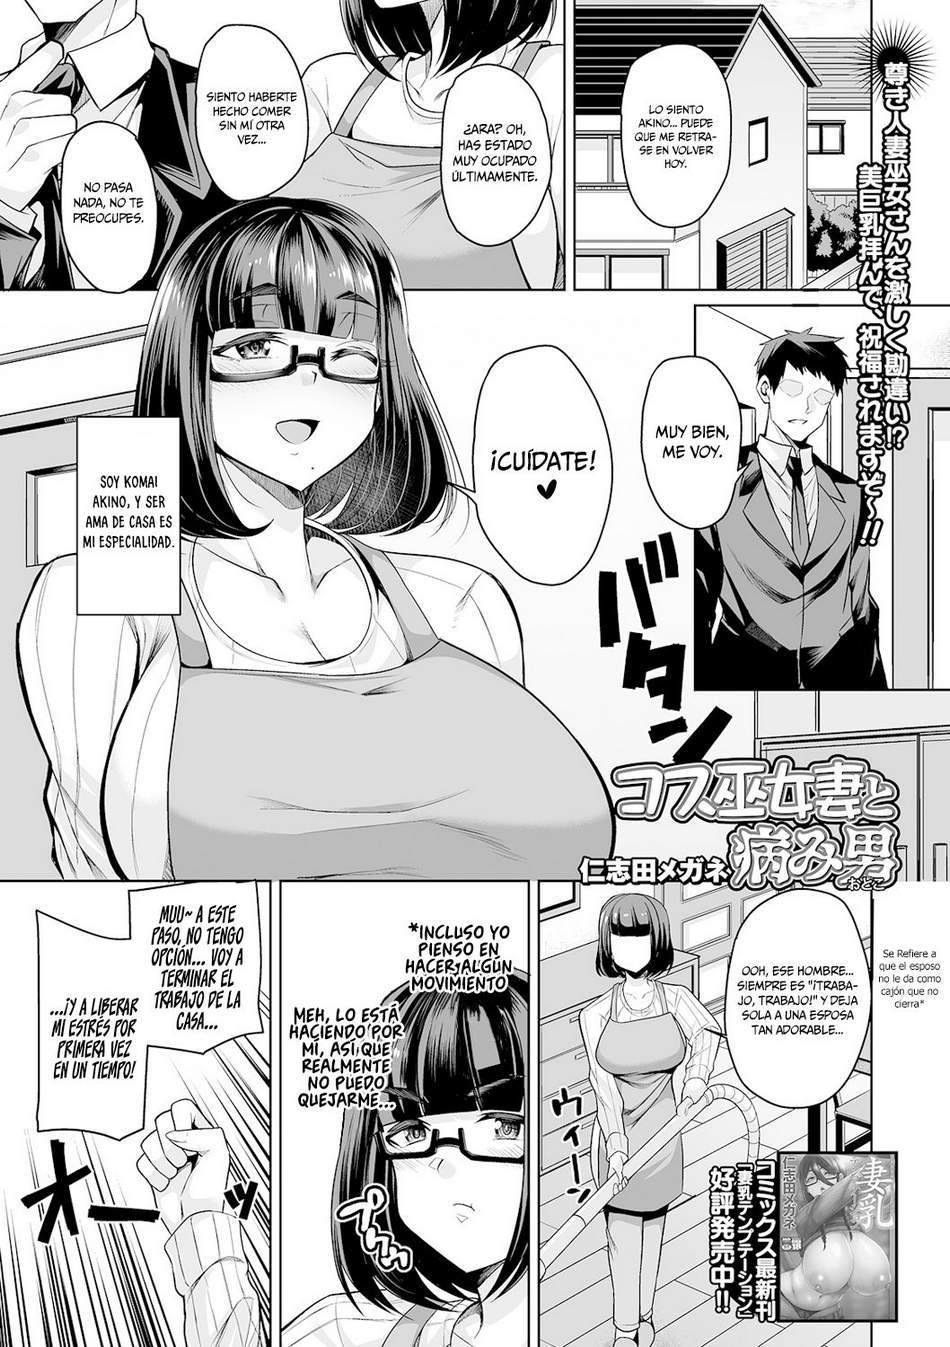 The Cosplaying Shrine Maiden And The Suffering Man - Page #1